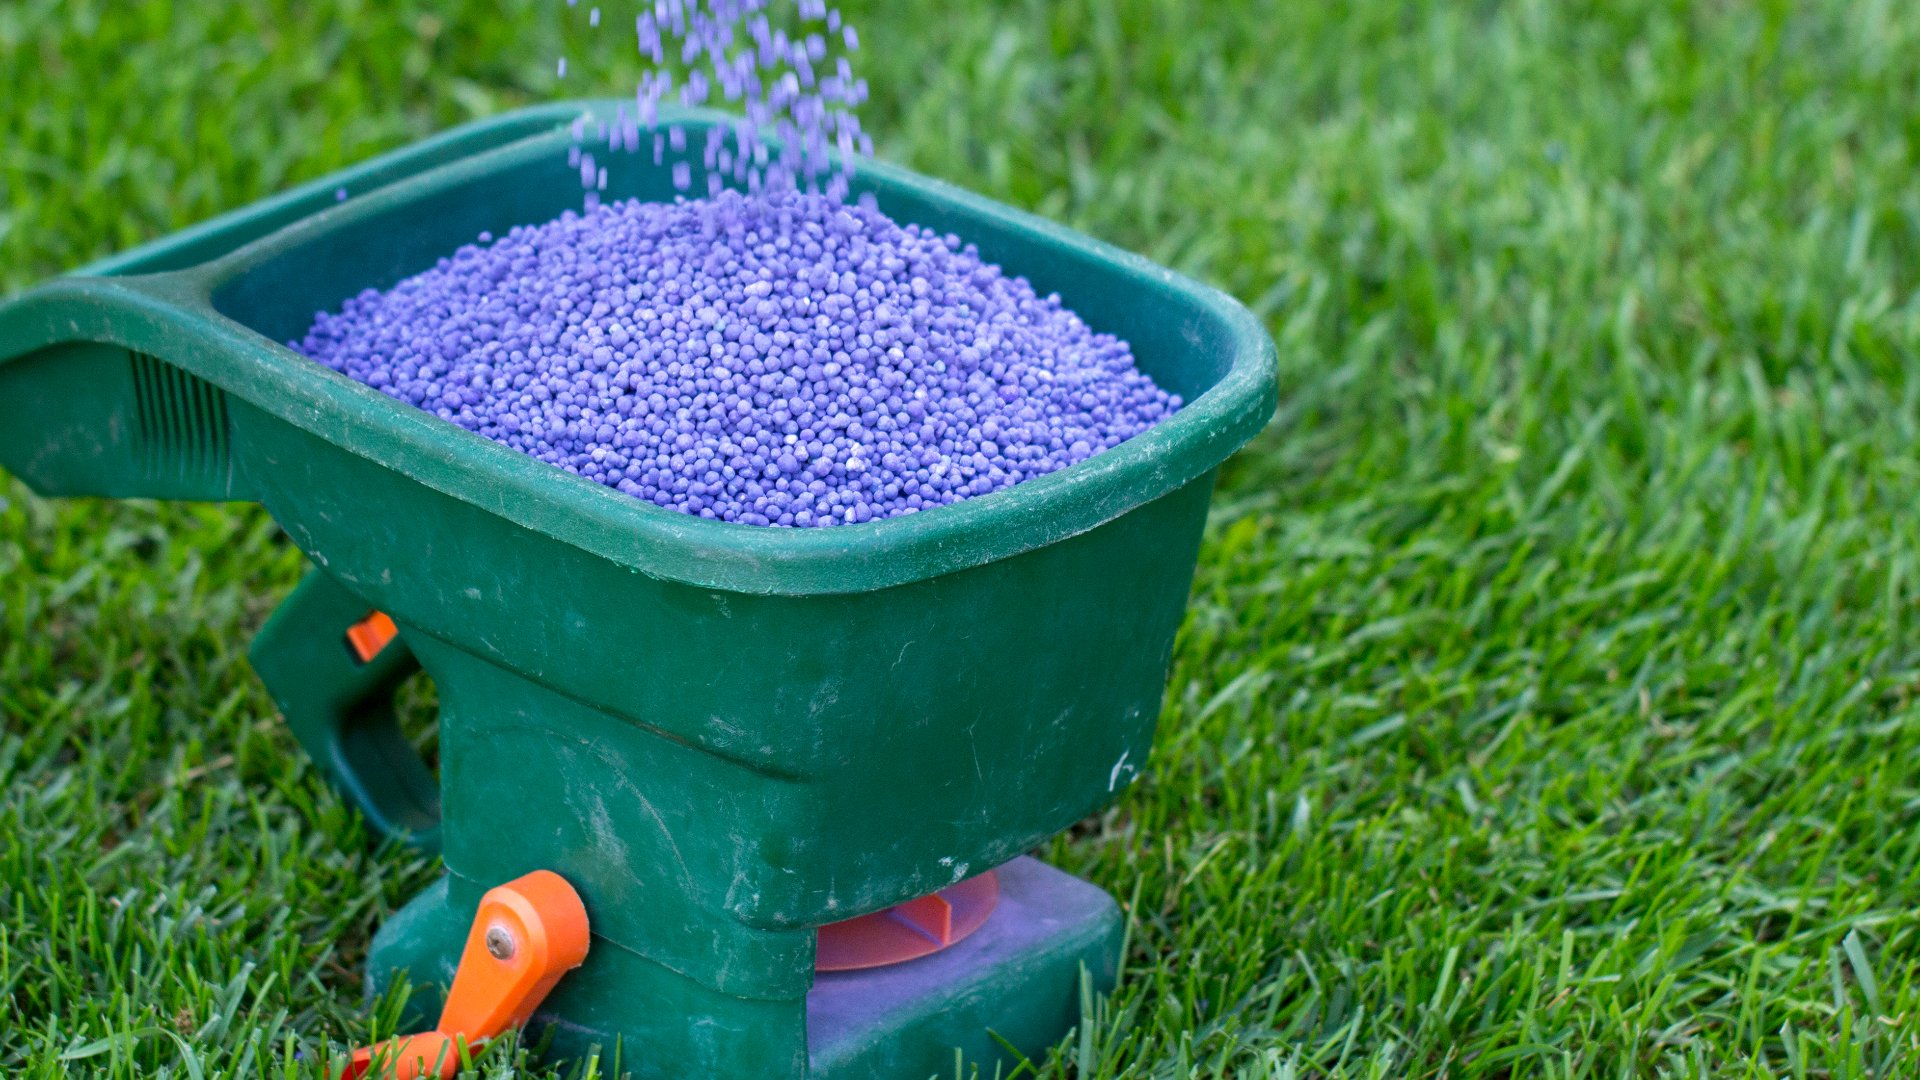 Don’t Add Too Much Fertilizer to Your Lawn - It Can Do More Harm Than Good!